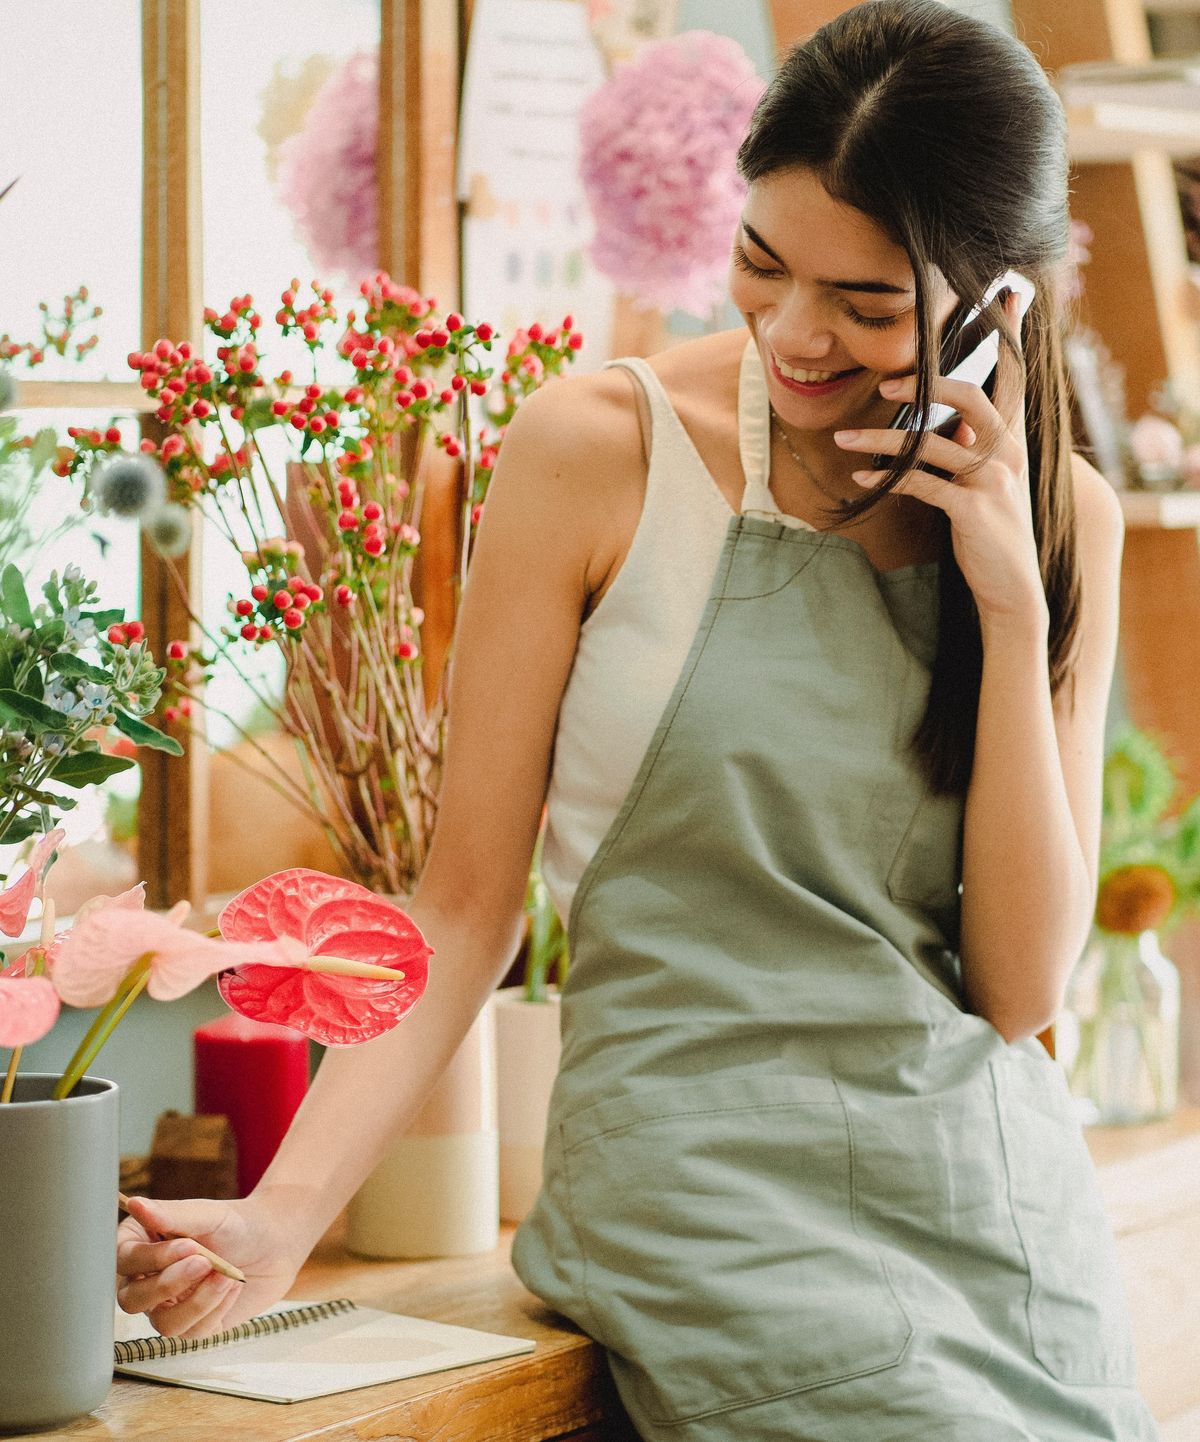 Woman talking on the phone in a flower shop.